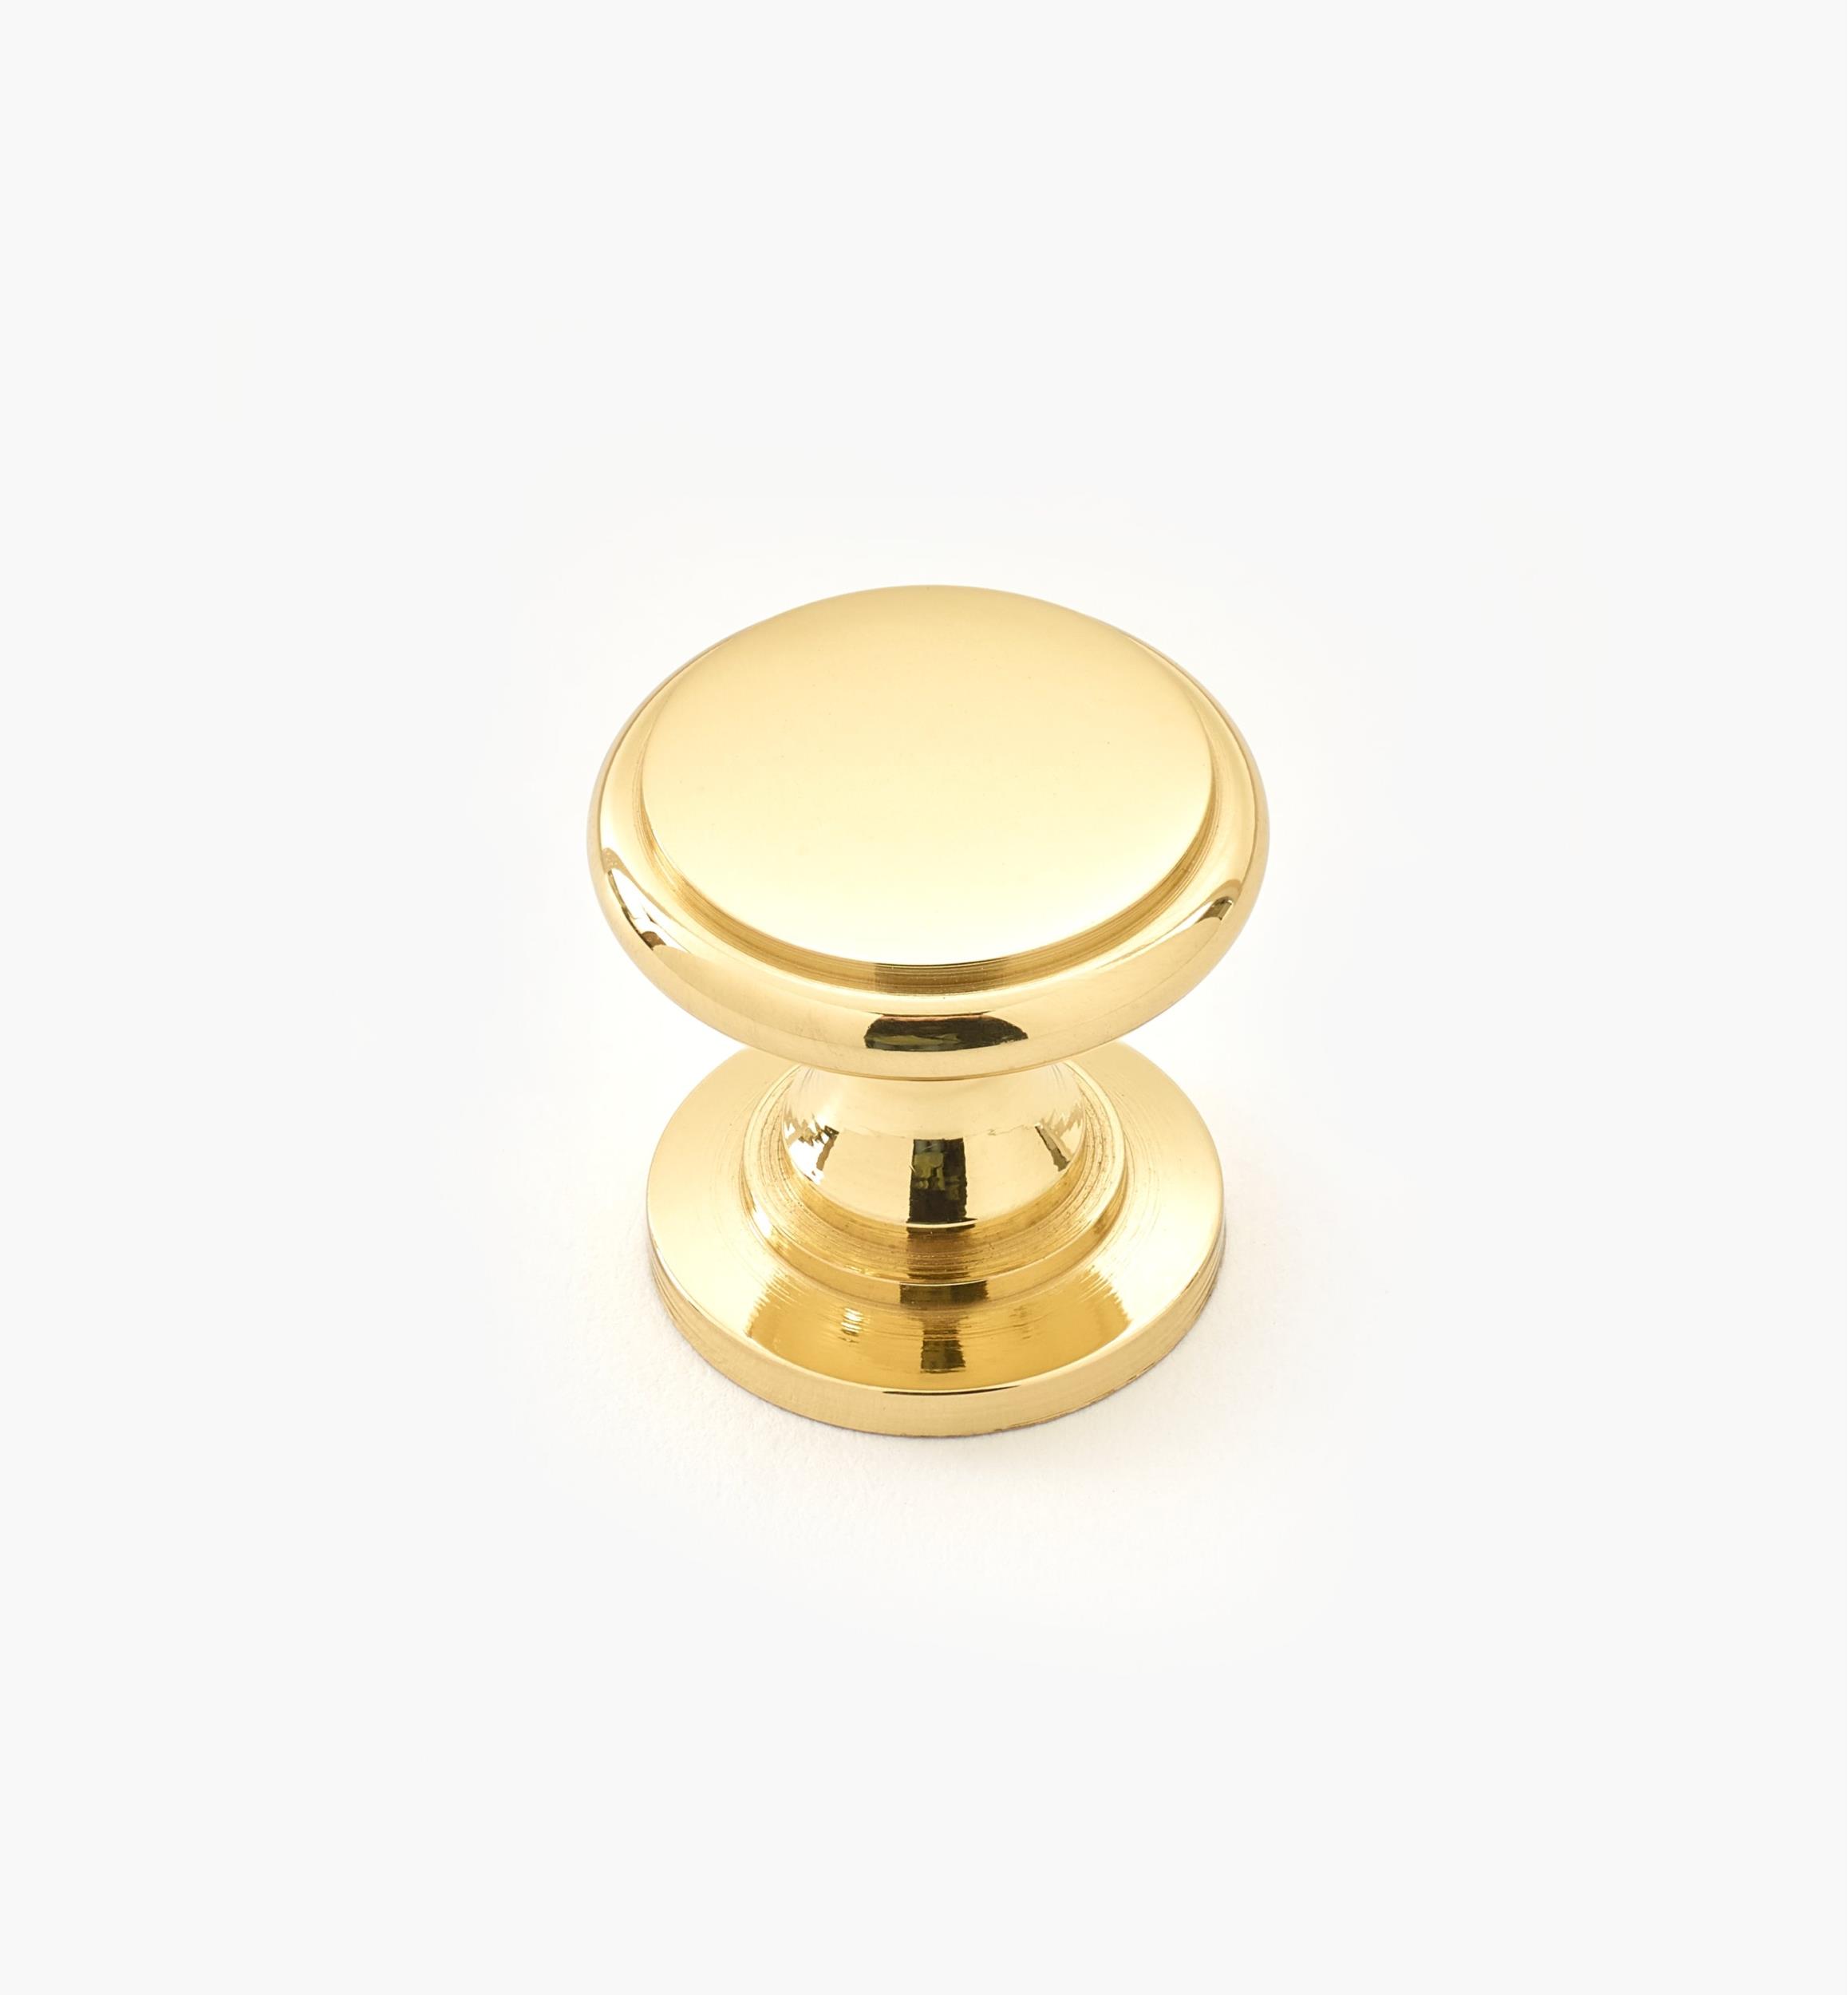 Small Brass Knobs II - Lee Valley Tools